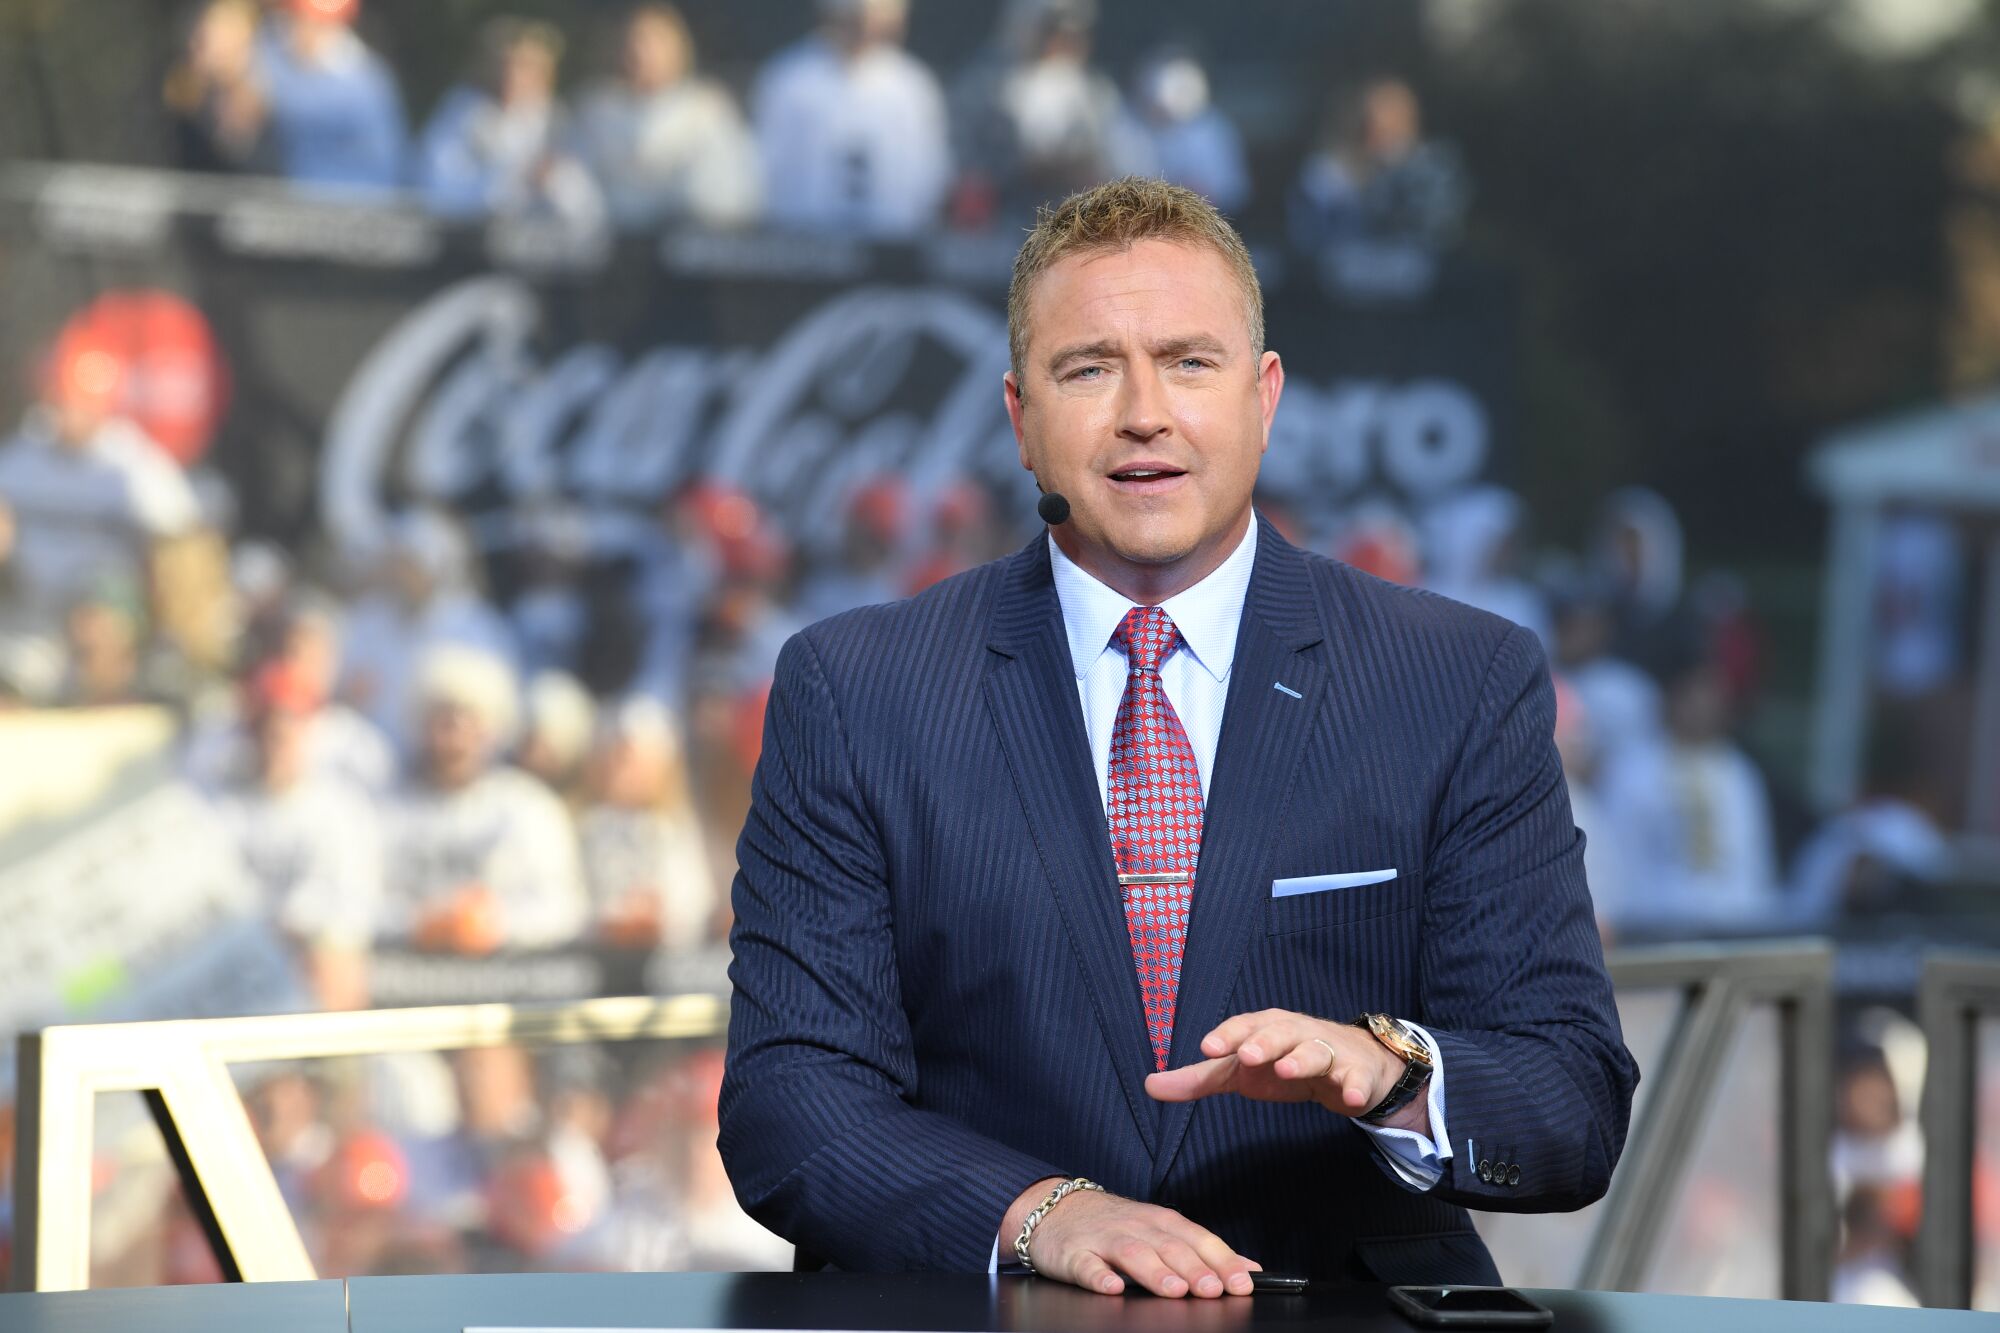 Kirk Herbstreit speaks on the set of "College GameDay" at Penn State on Oct. 19, 2019.